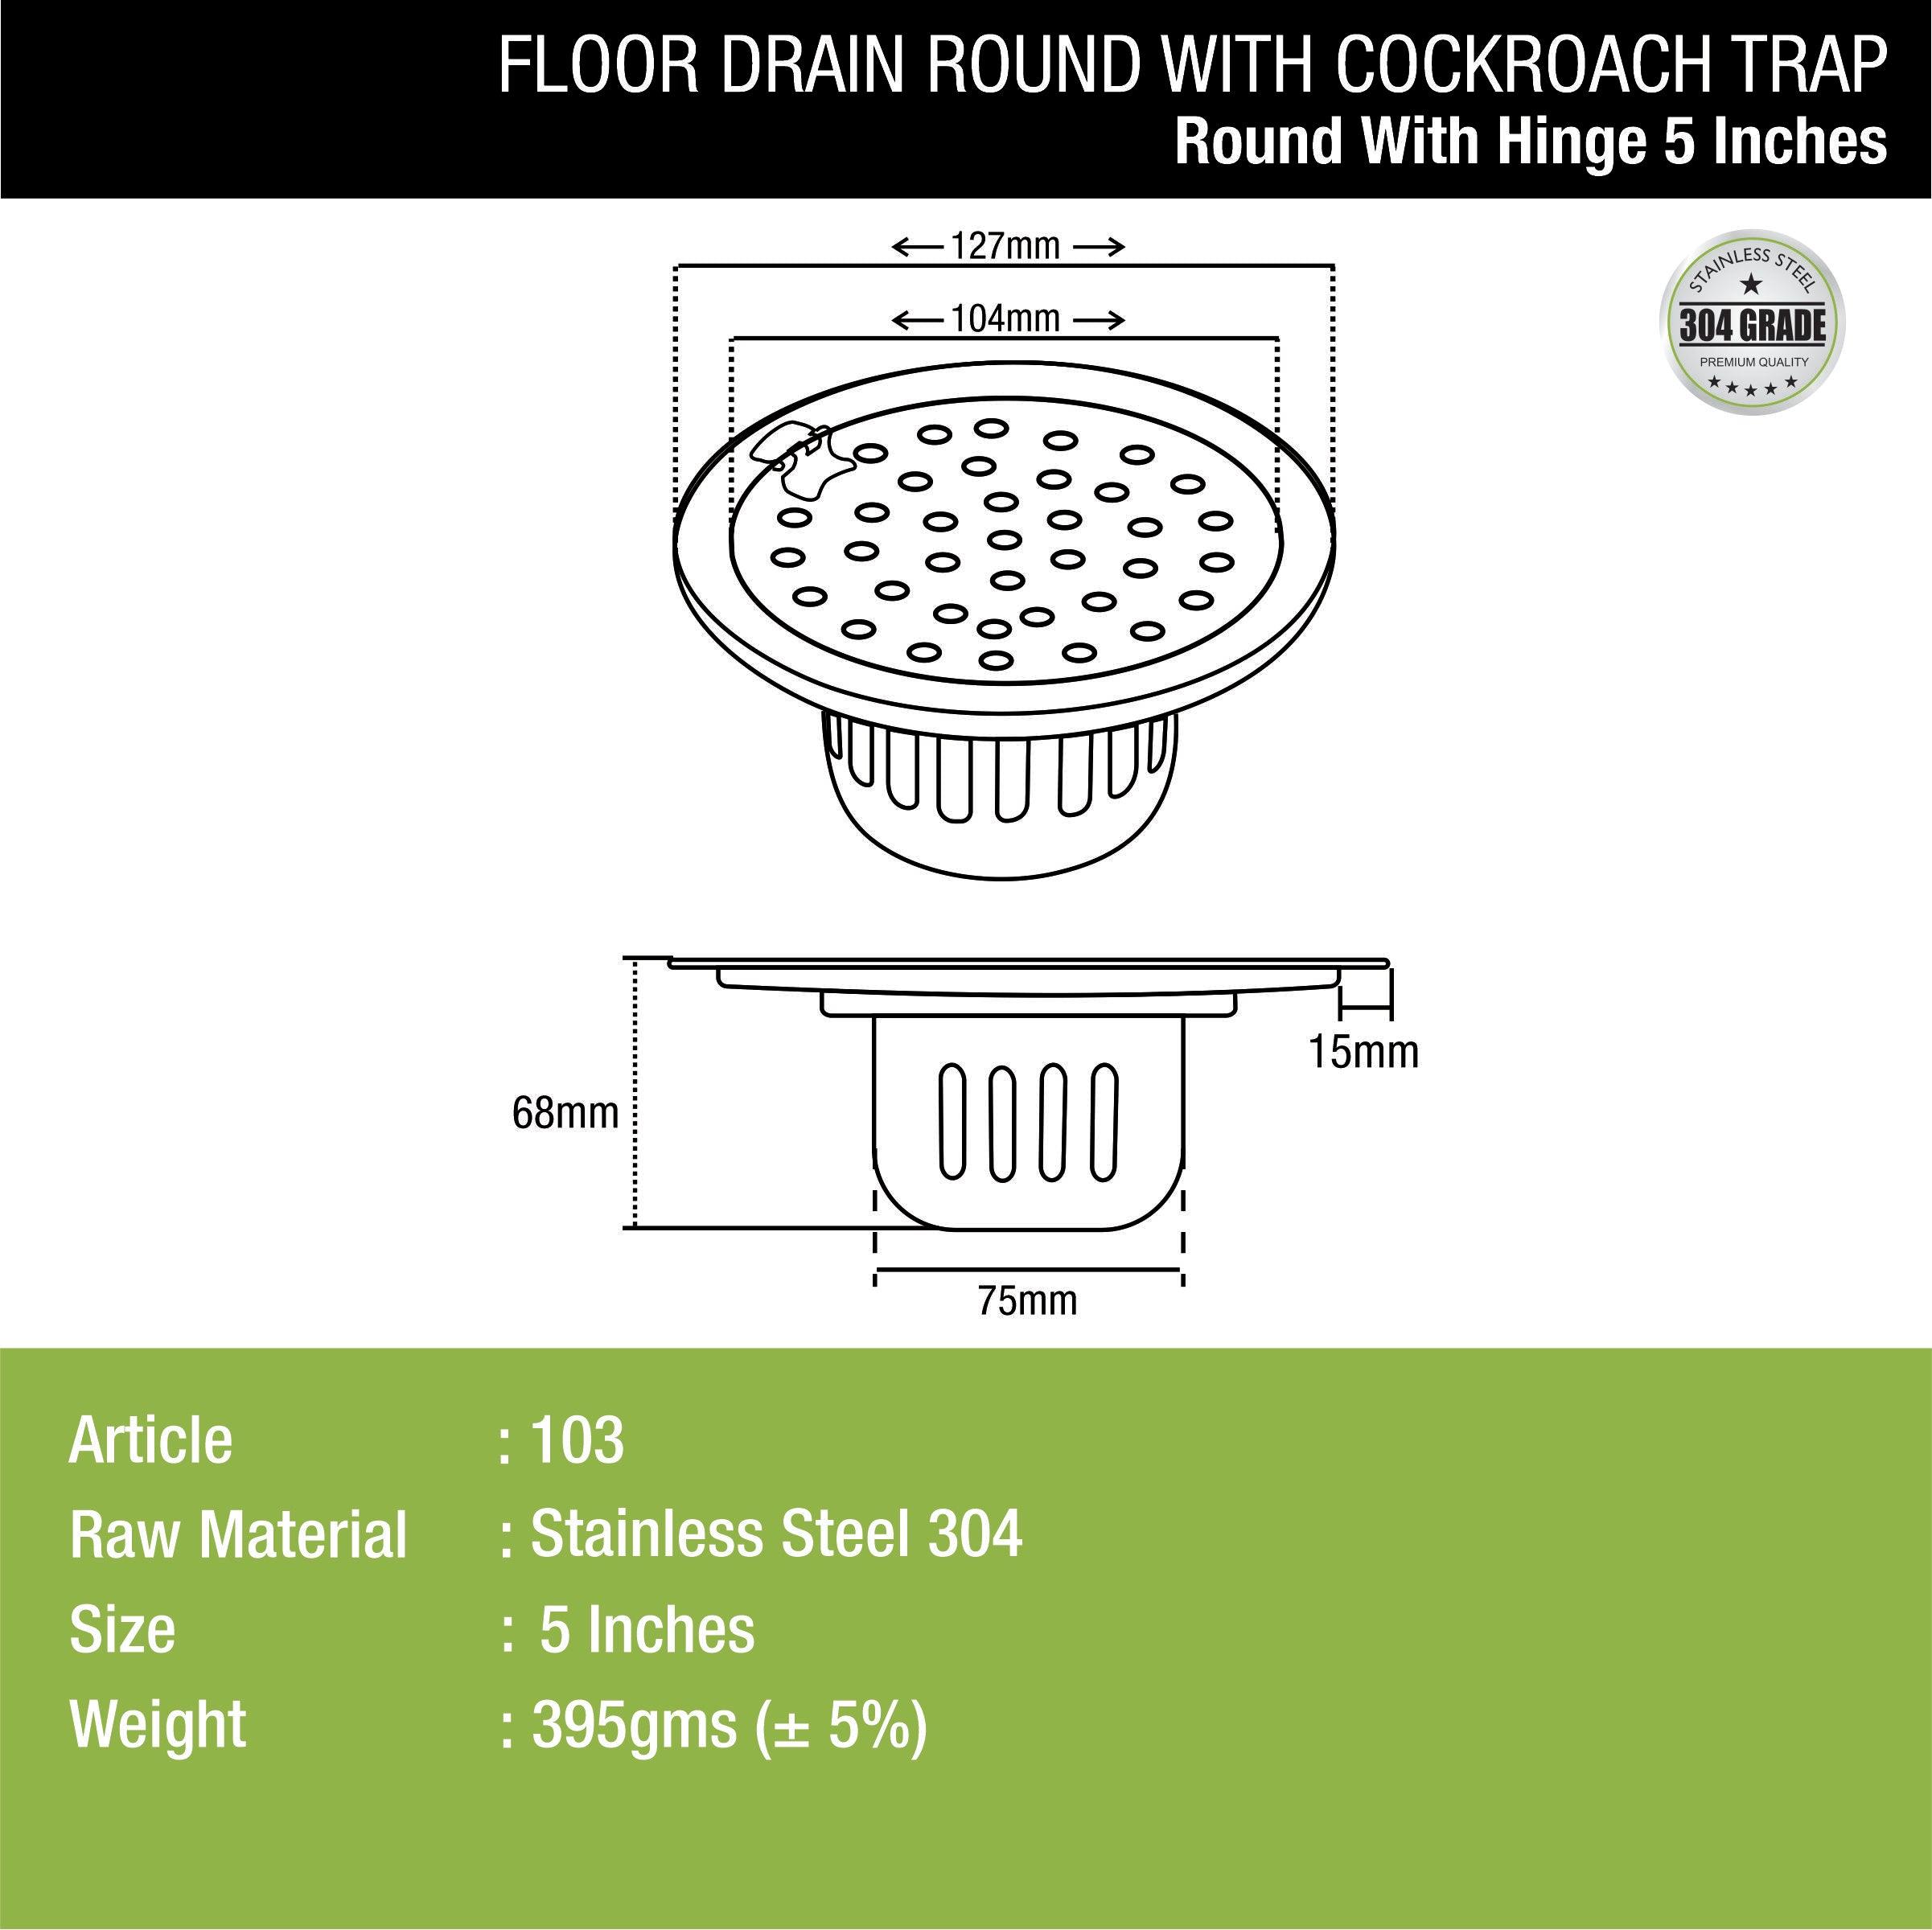 Round Floor Drain (5 inches) with Hinge & Cockroach Trap dimensions and sizes